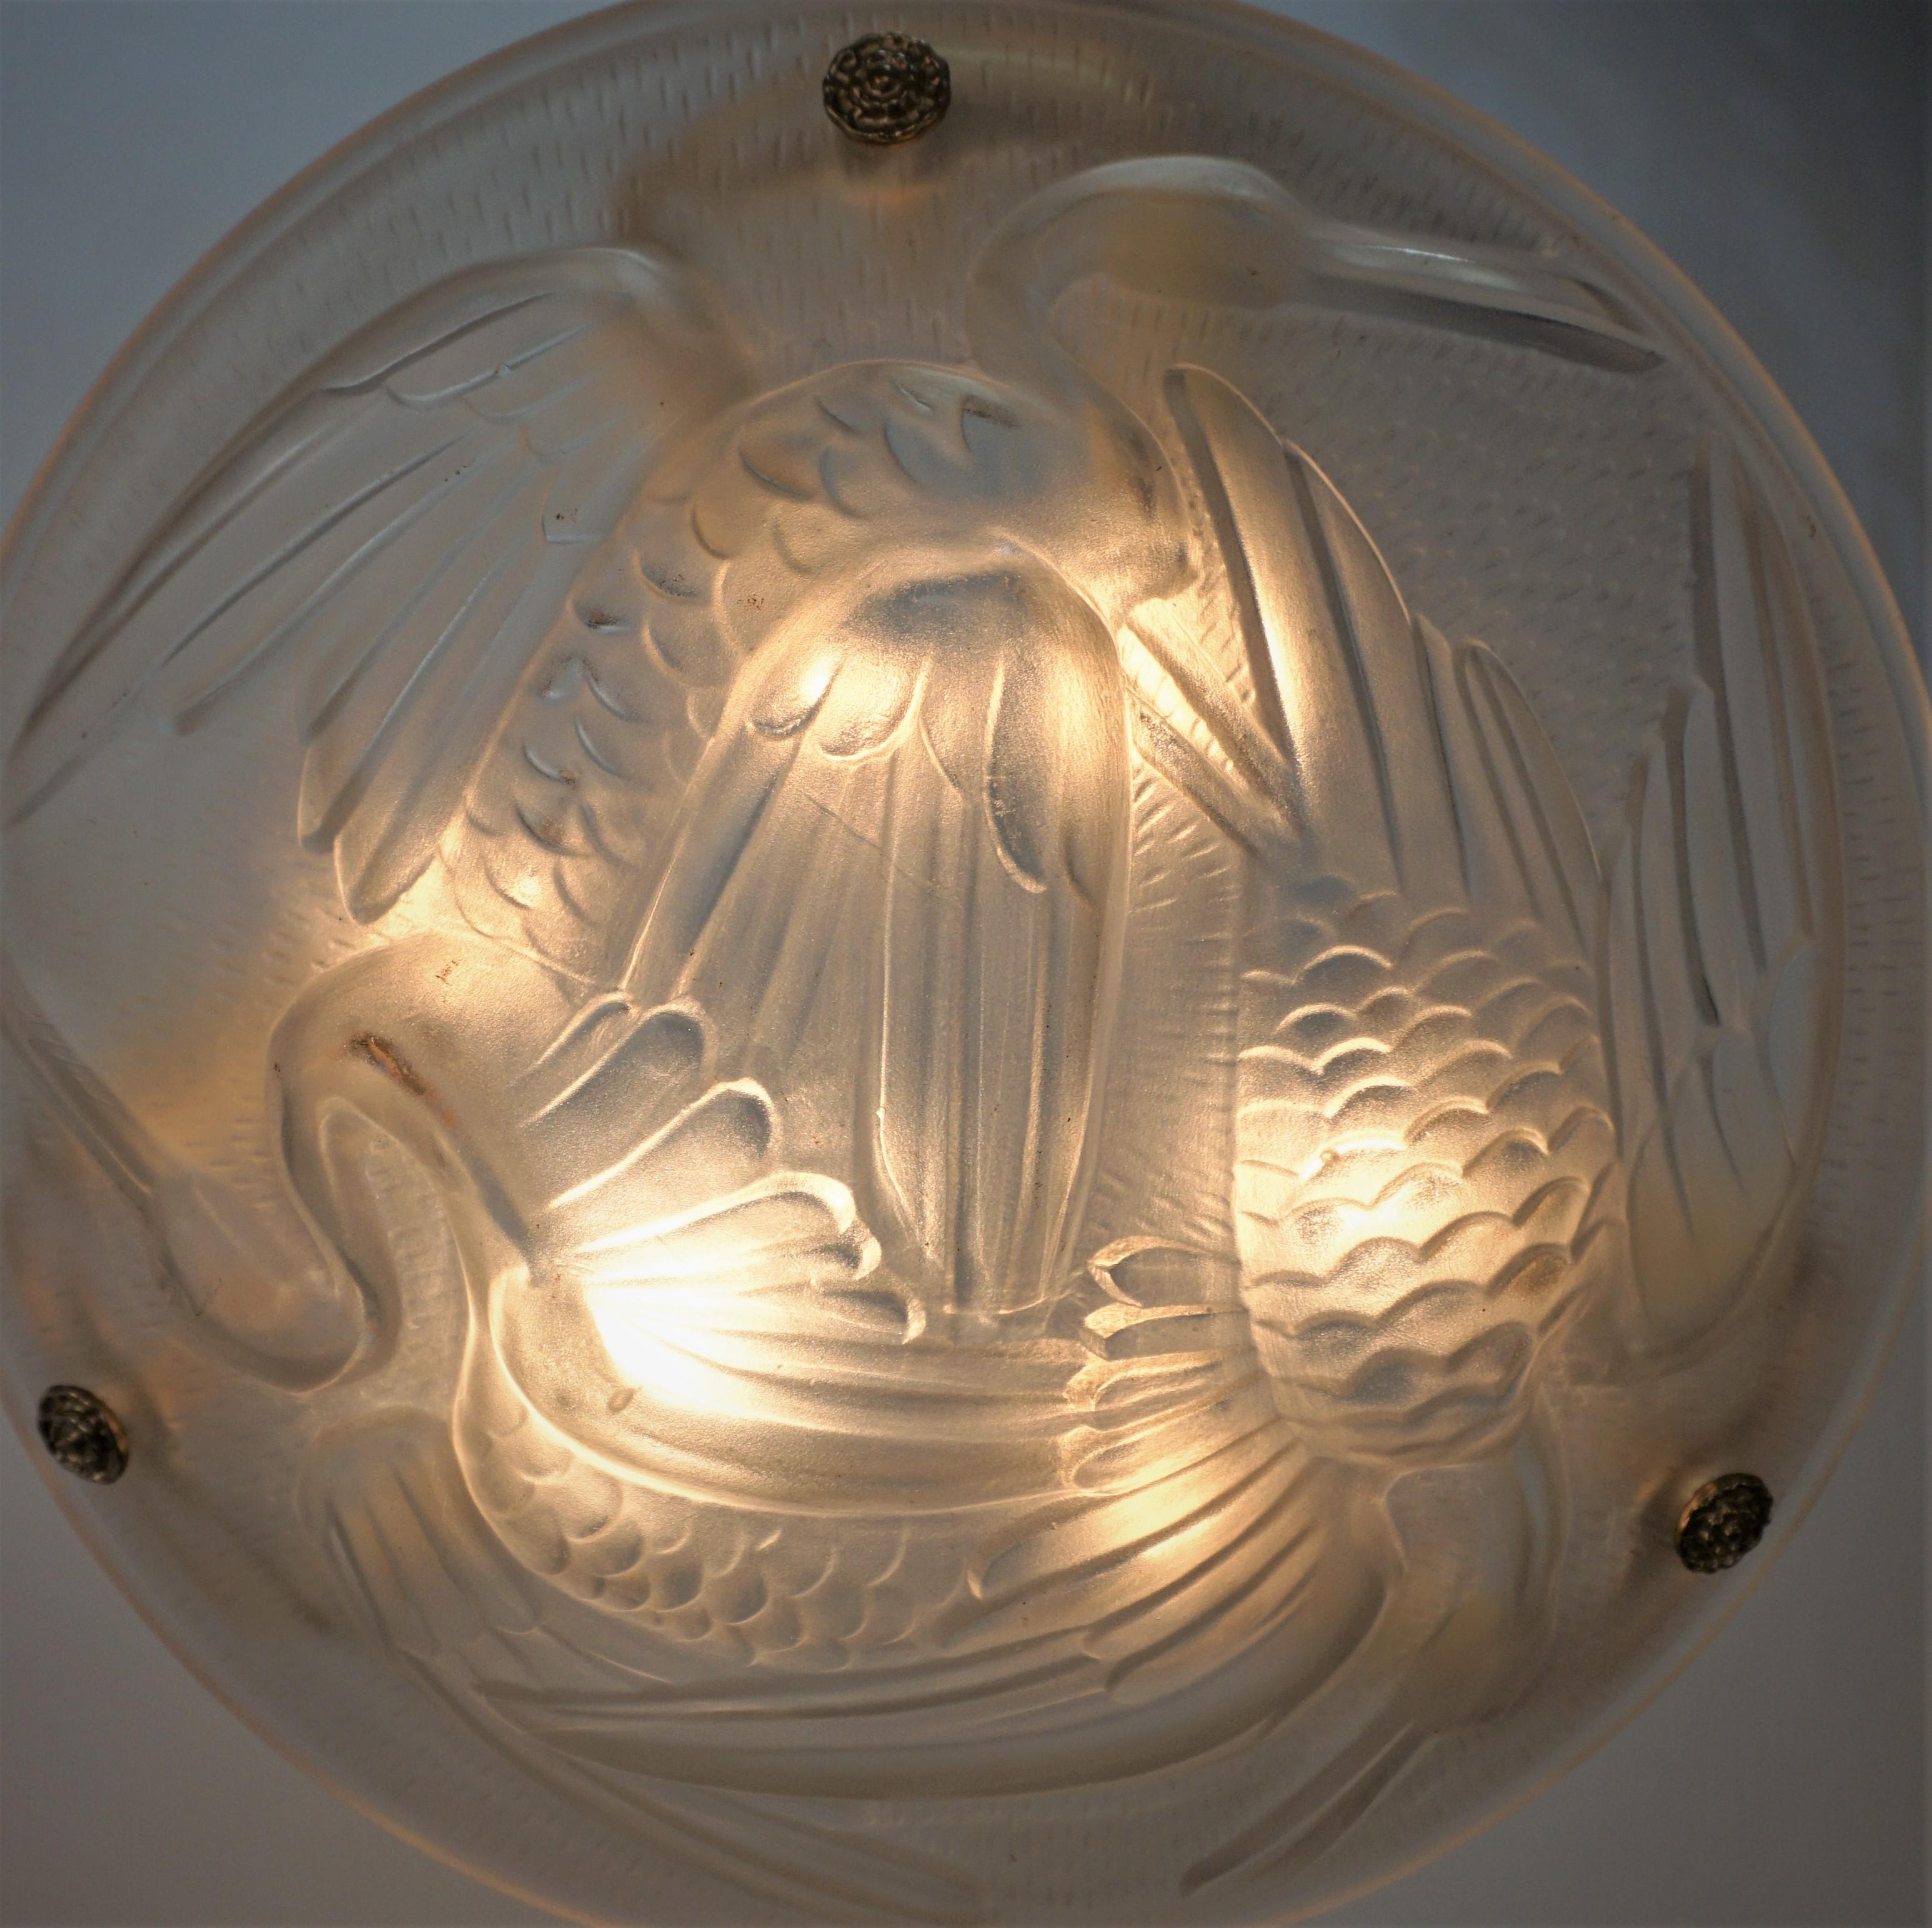 Clear frost glass 1920's art deco with three storks has bronze chain and canopy pendant chandelier. Two in stock.
Six lights, 75max each.
